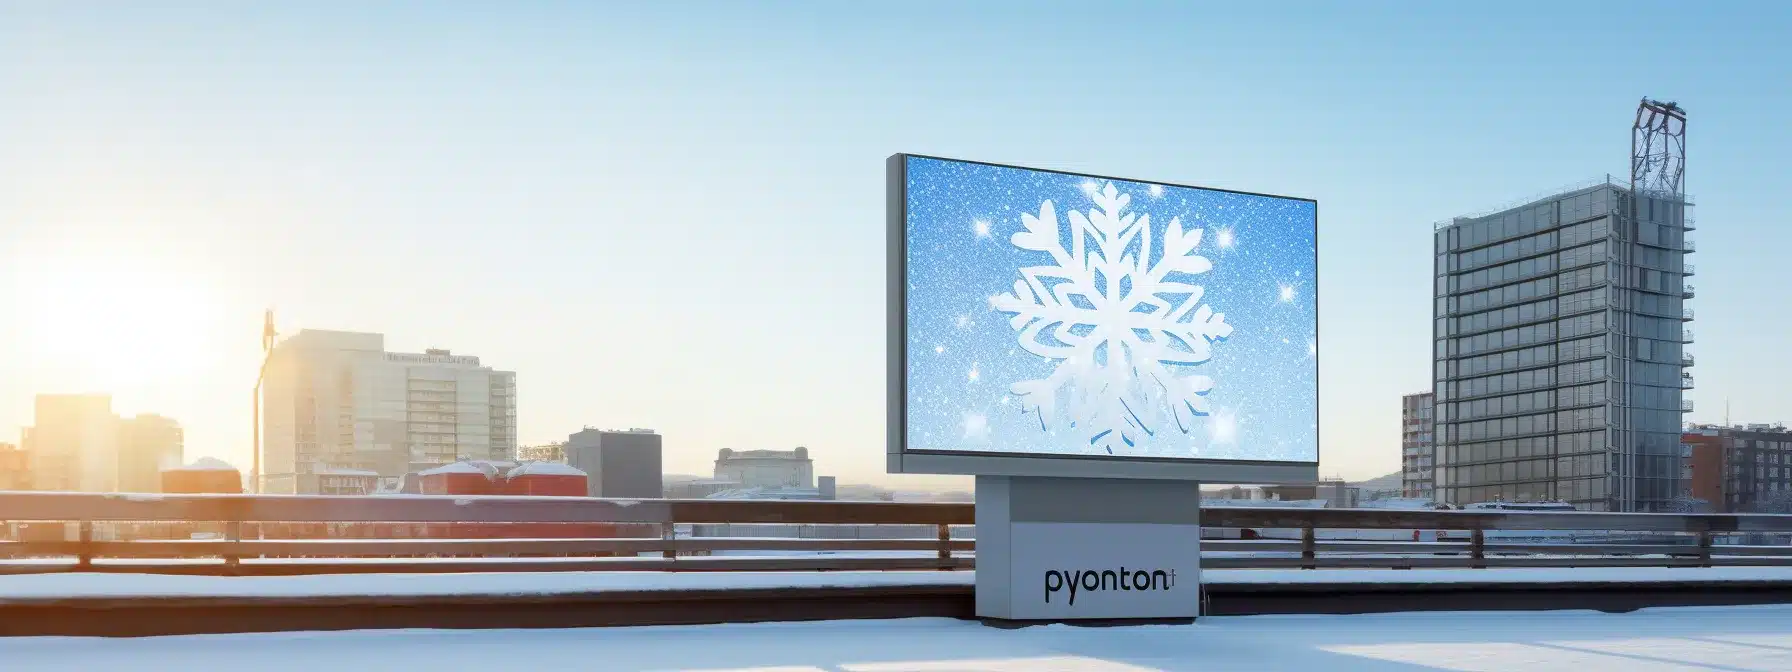 A Billboard With A Unique Snowflake Logo, Displaying The Brand'S Visual Identity, Stands Tall And Captures Attention.